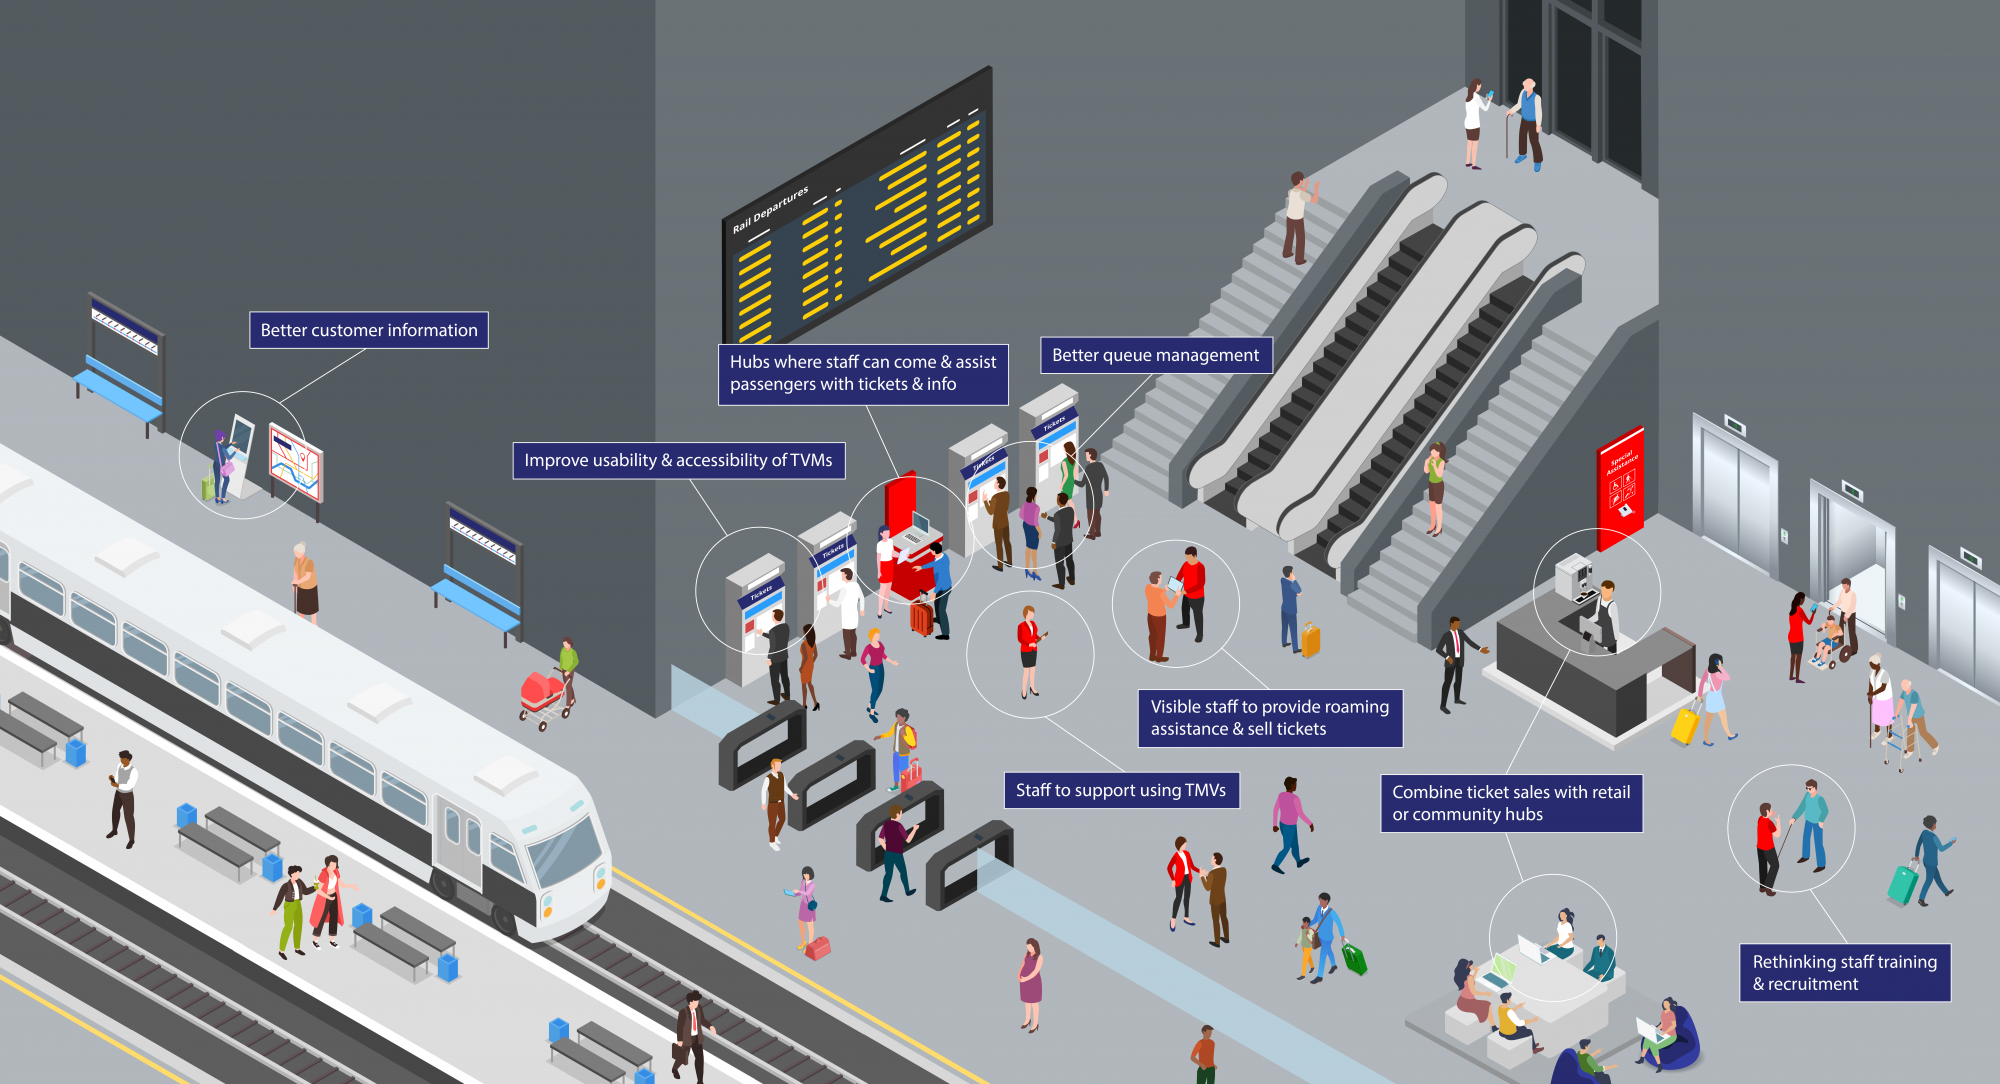 An infographic of a train station created by Mima to visualise all the potential painpoints and solutions for ticket office closures